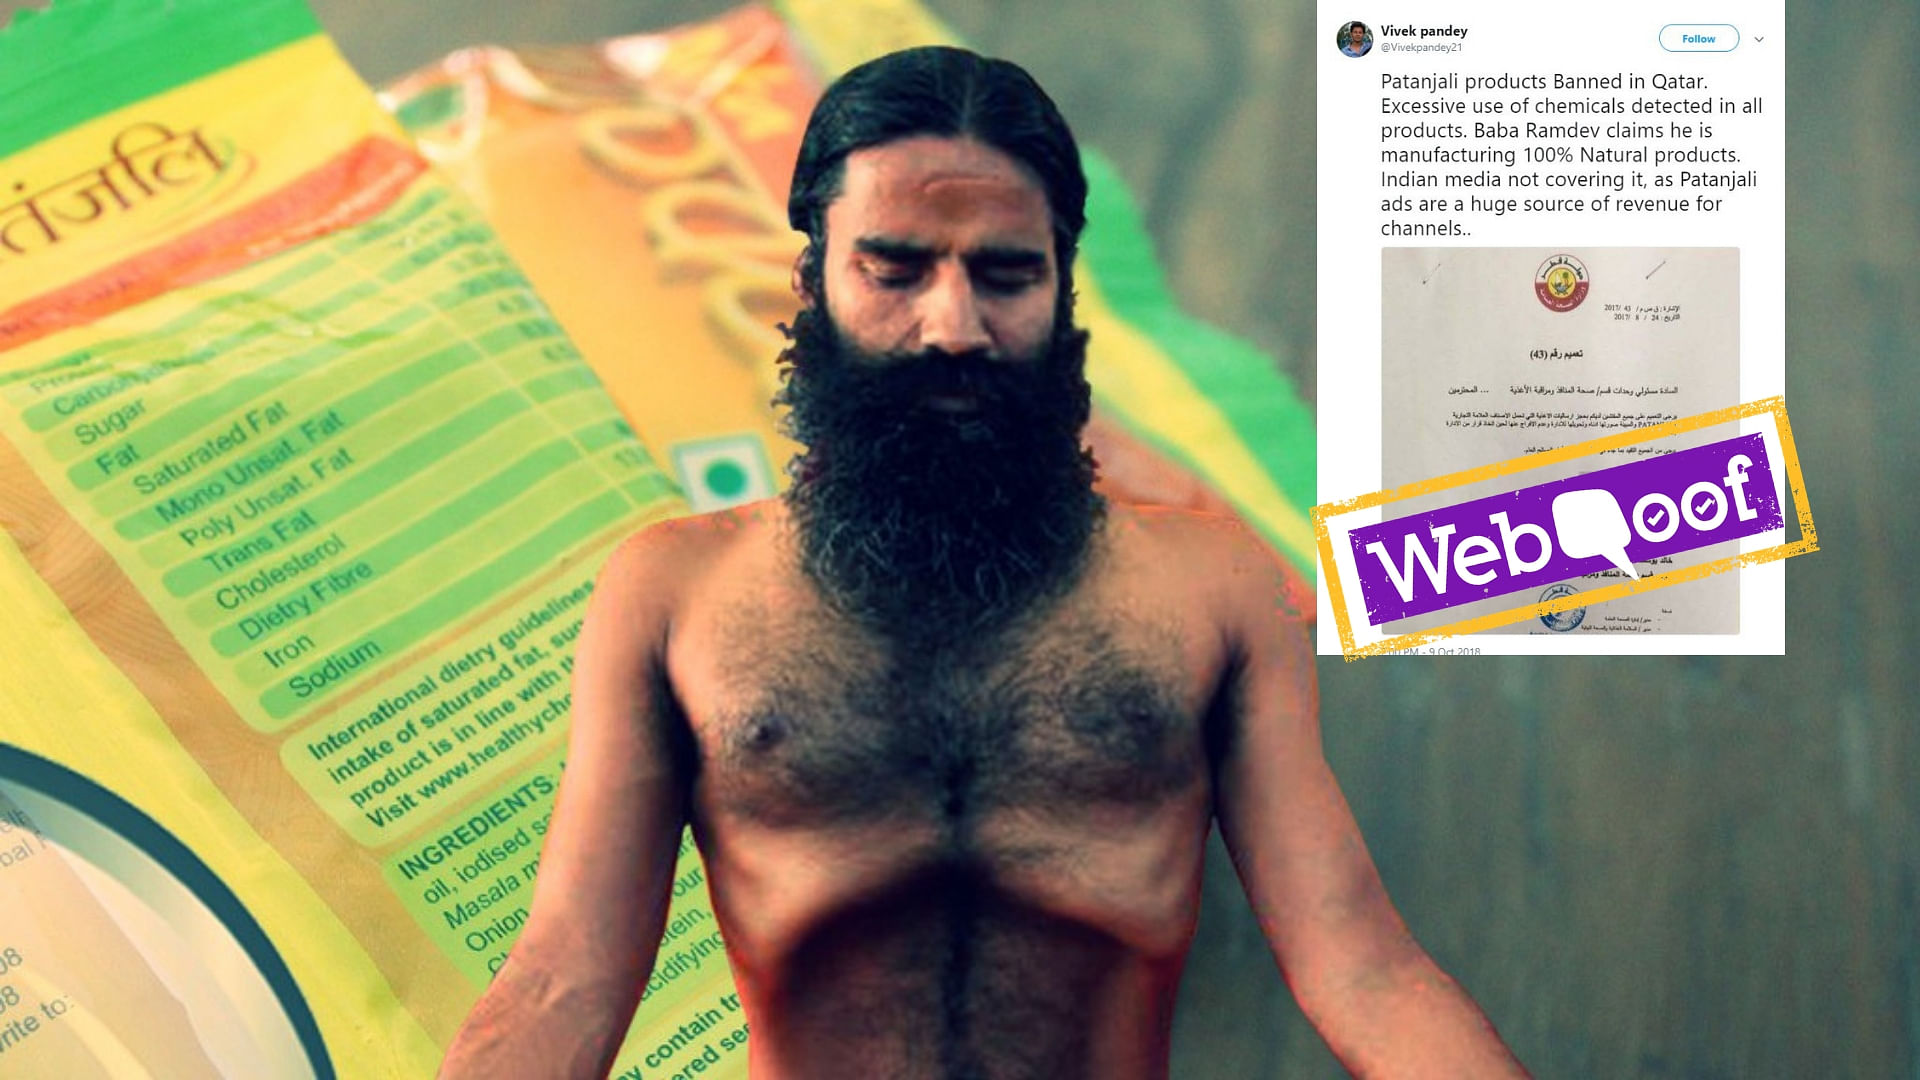 A post viral on social media said Patanjali products, with “excessive use of chemicals”, have been banned in Qatar